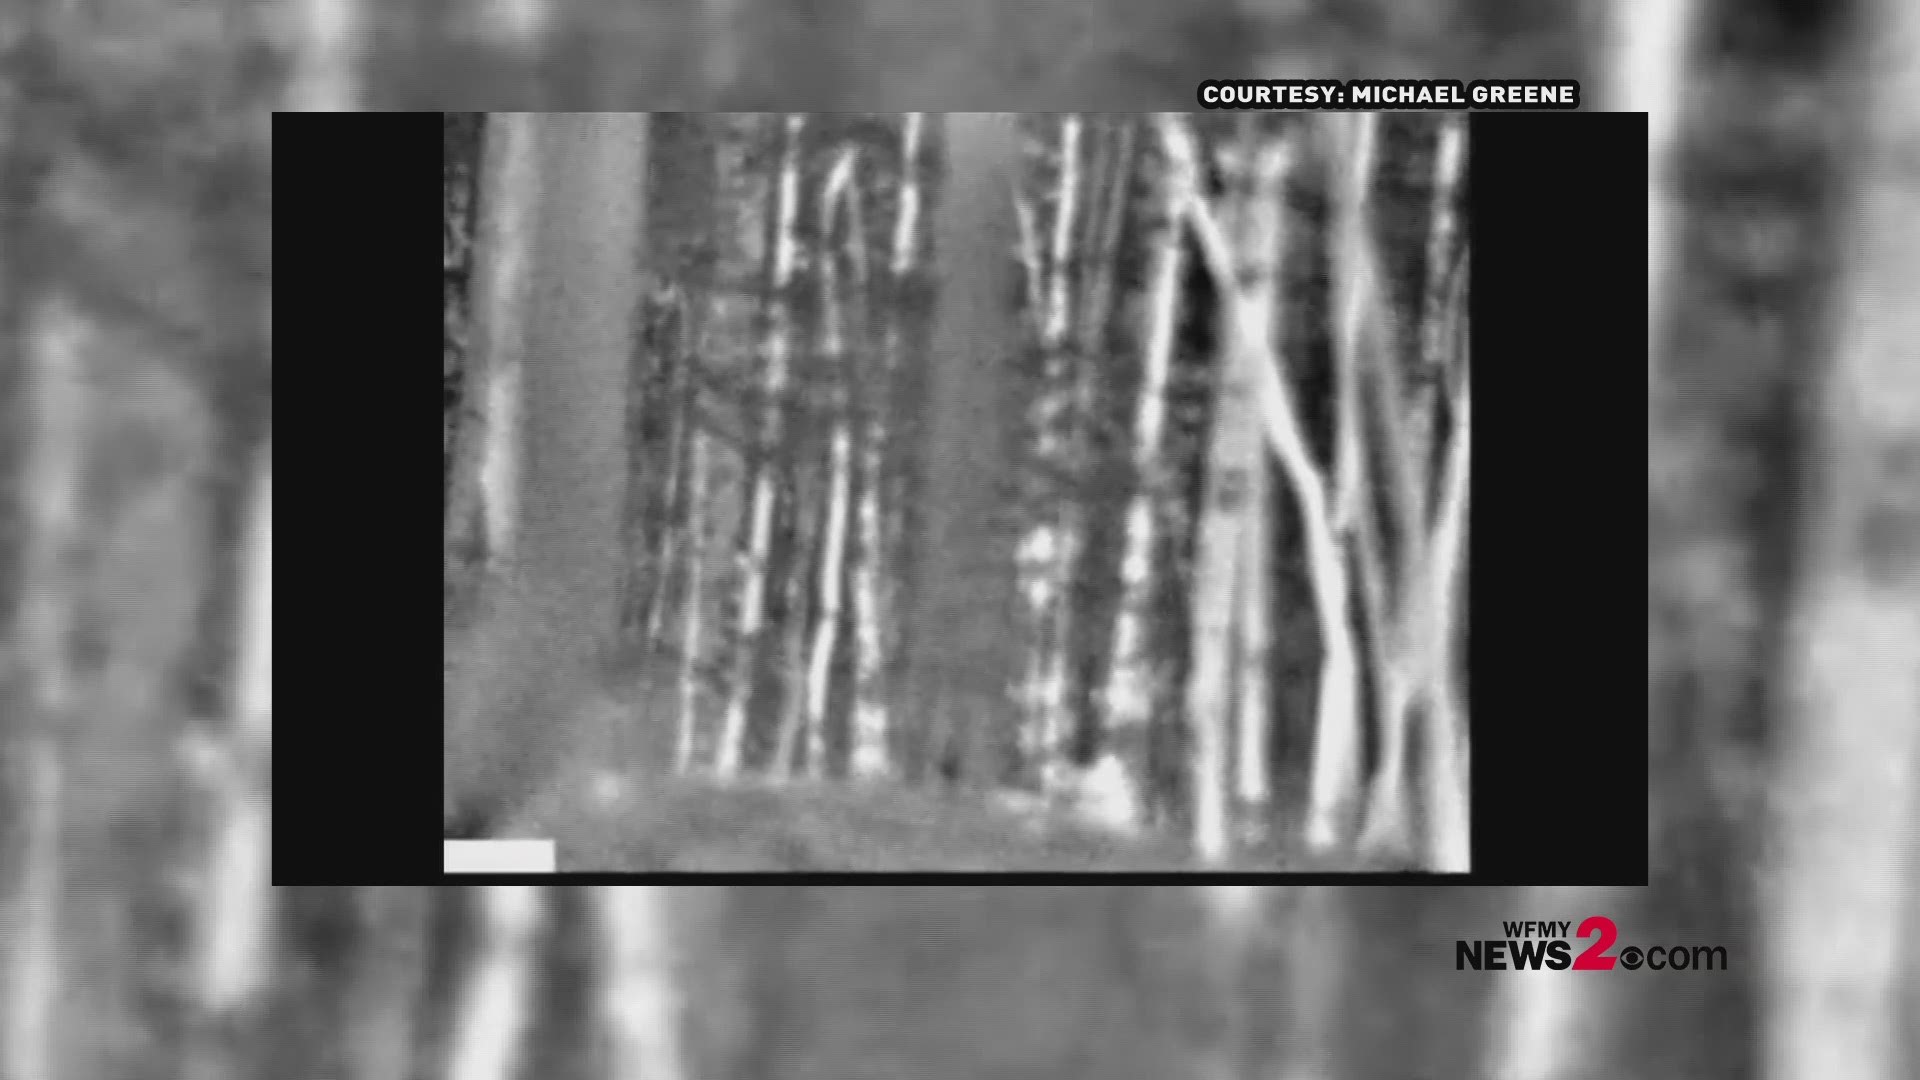 Michael Greene claims his now-viral Squeaky Thermal video shows Bigfoot lurking in the Uhwarrie National Forest.